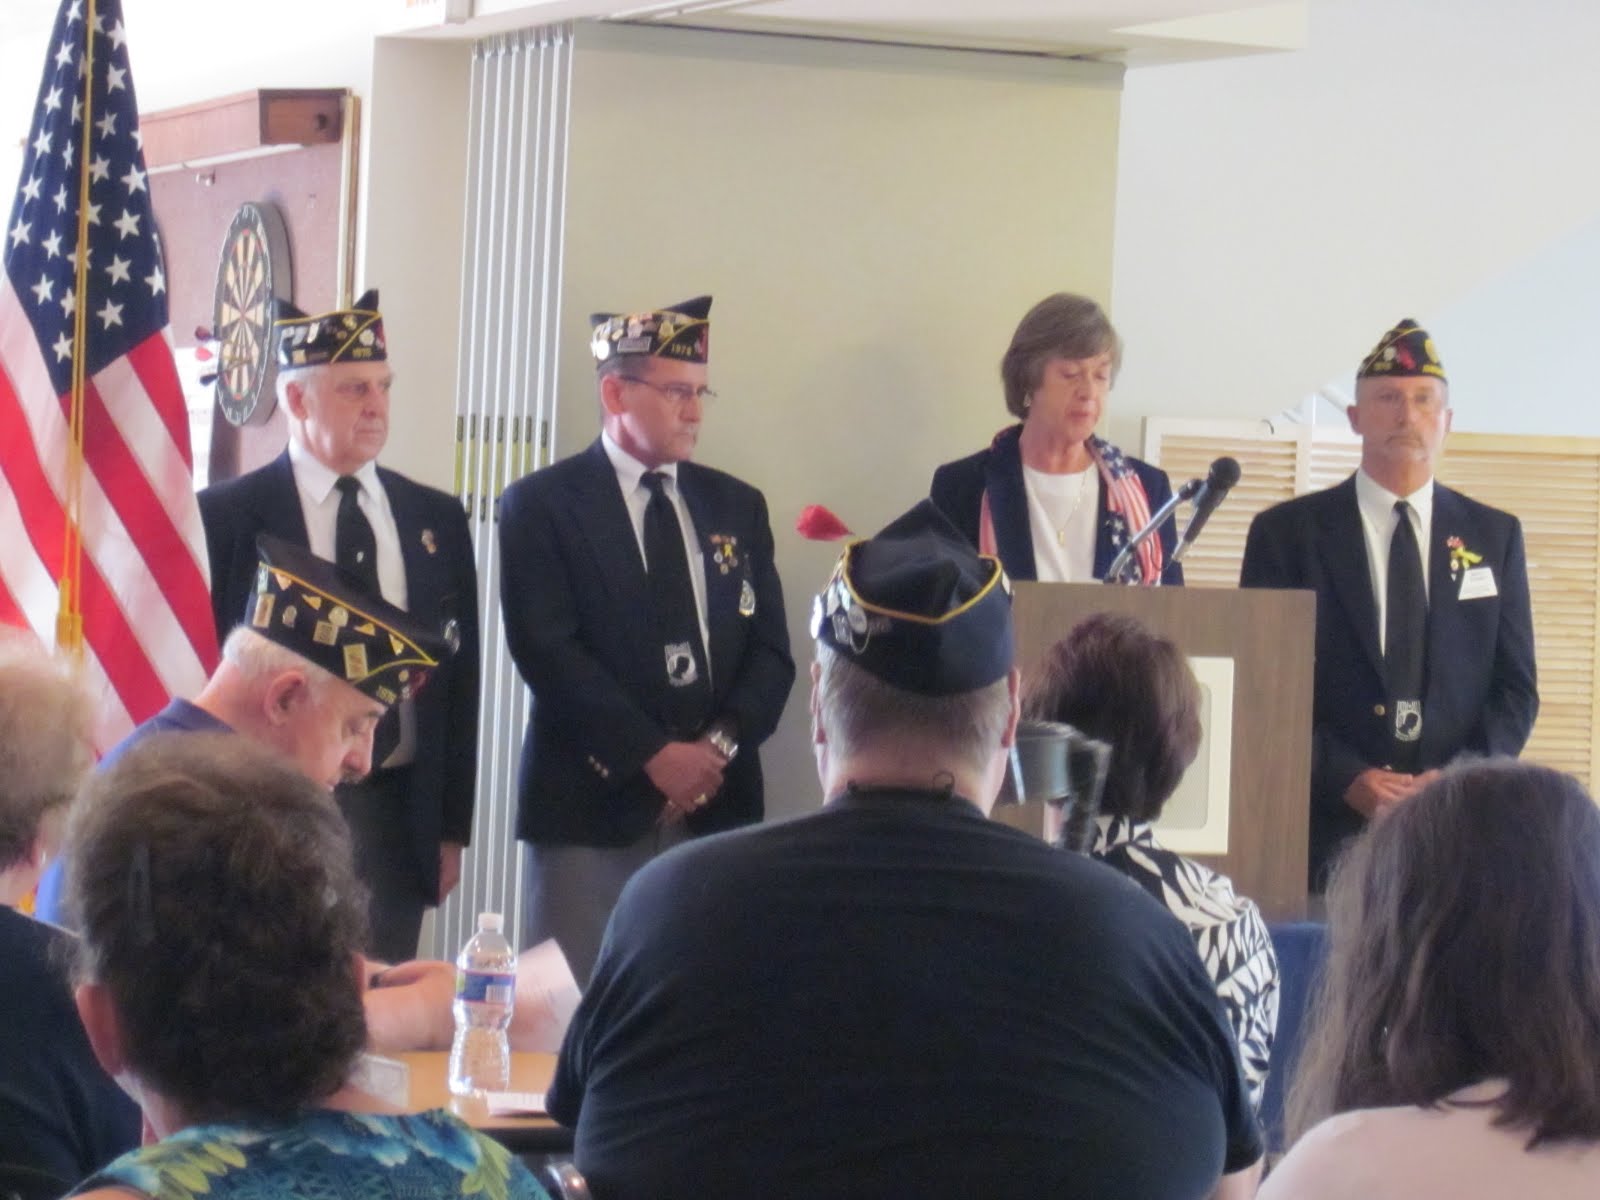 Annandale’s American Legion post commemorates Memorial Day Annandale